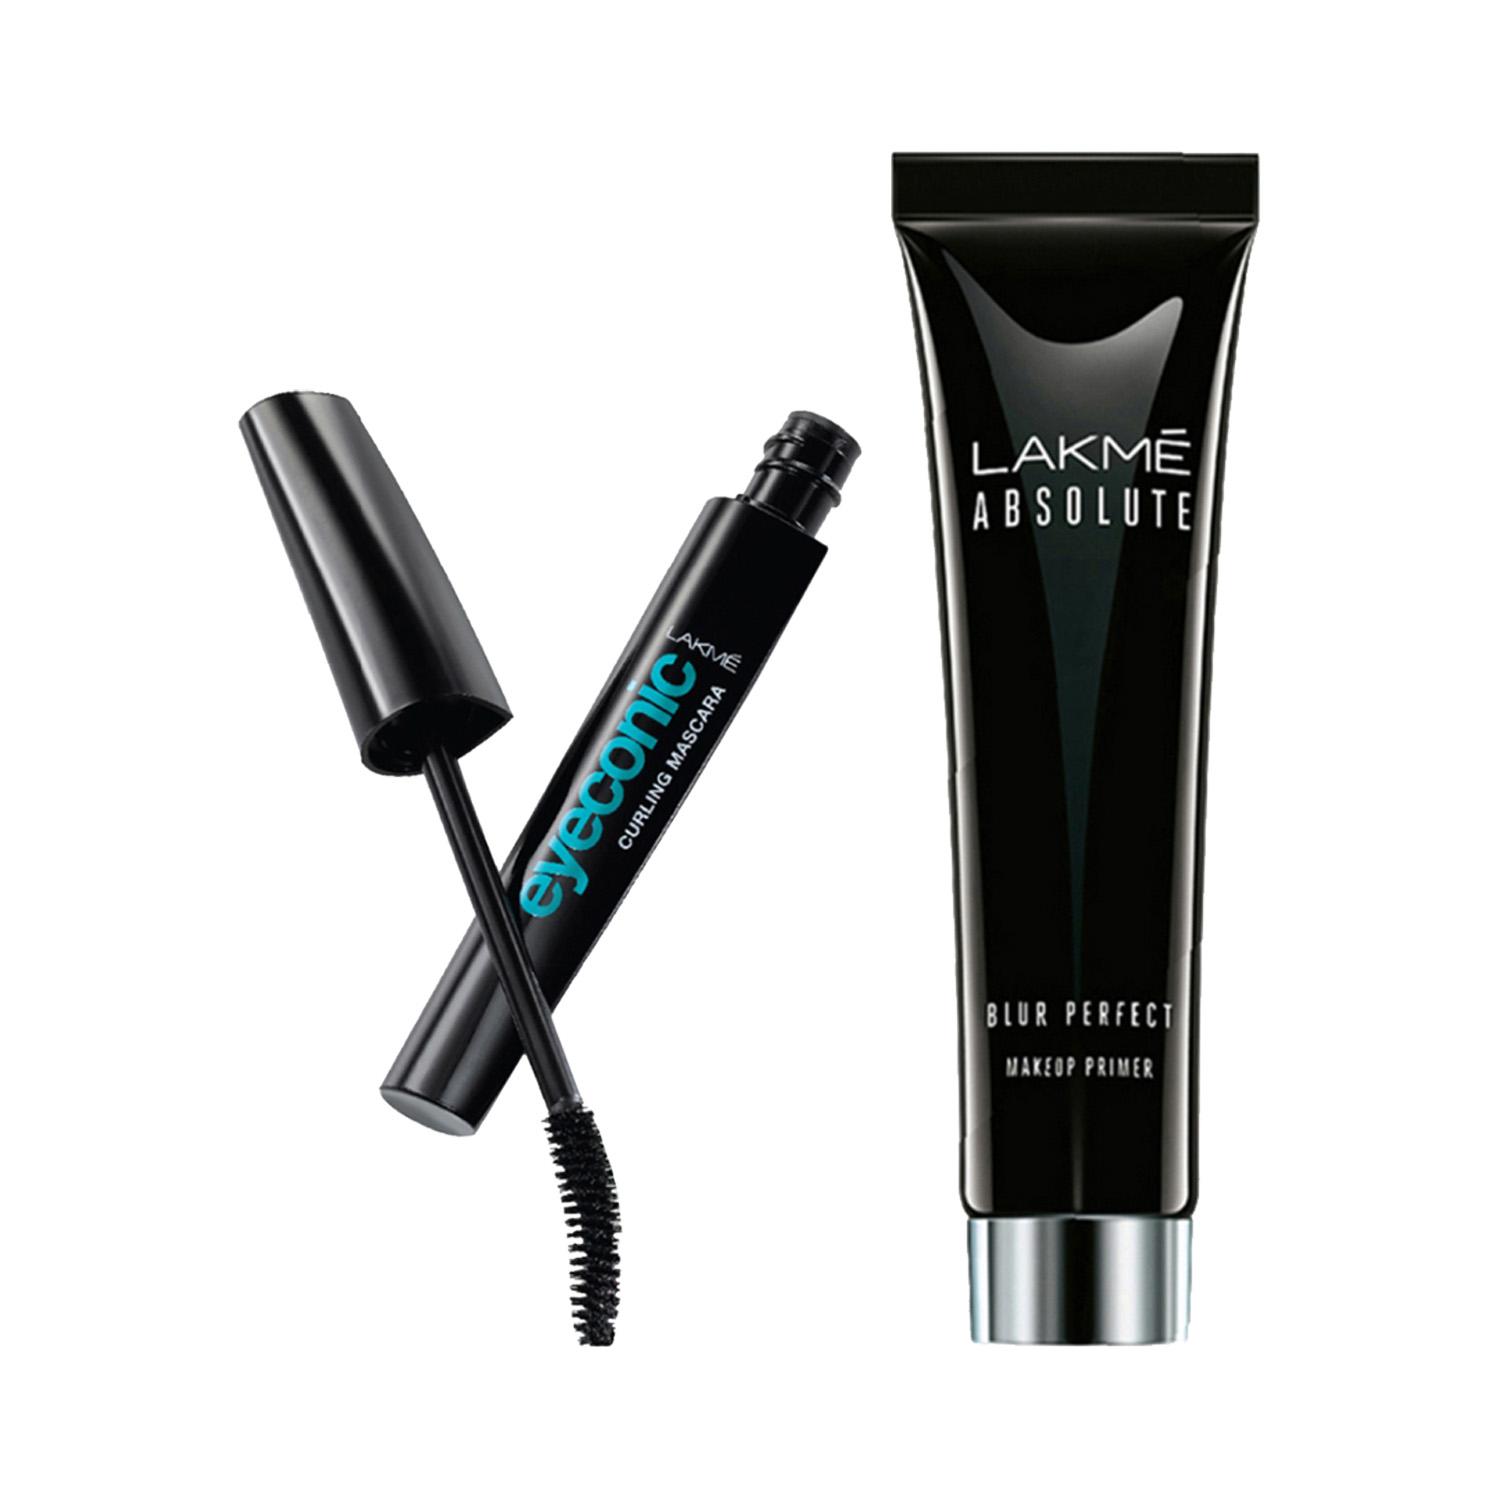 Lakme | Lakme Eyeconic Curling Mascara In Black + Absolute Blur Perfect Makeup Primer Combo